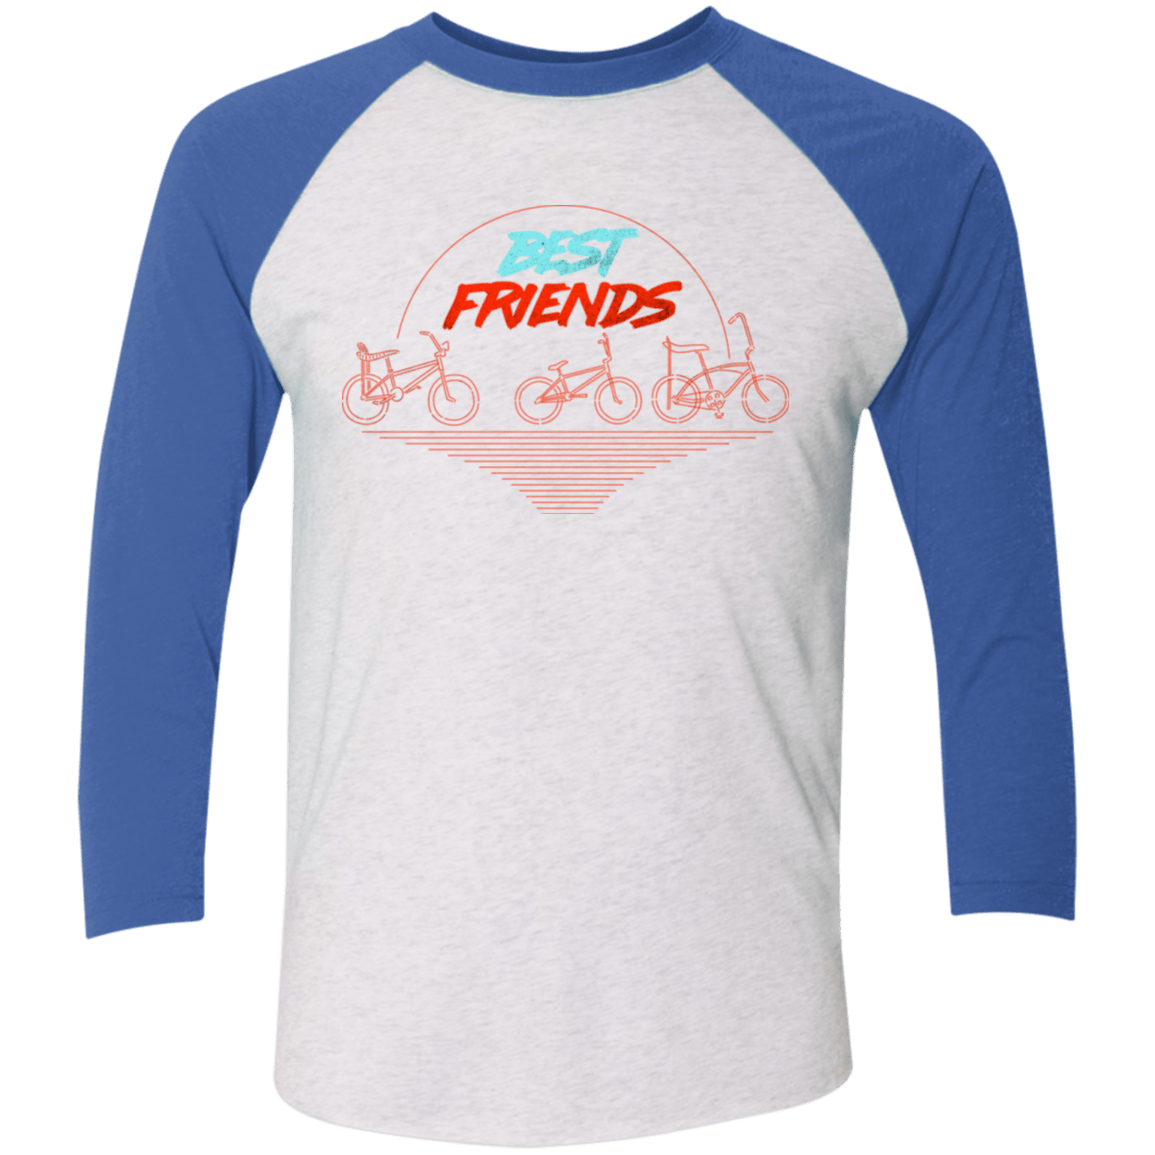 T-Shirts Heather White/Vintage Royal / X-Small Best Friends Men's Triblend 3/4 Sleeve